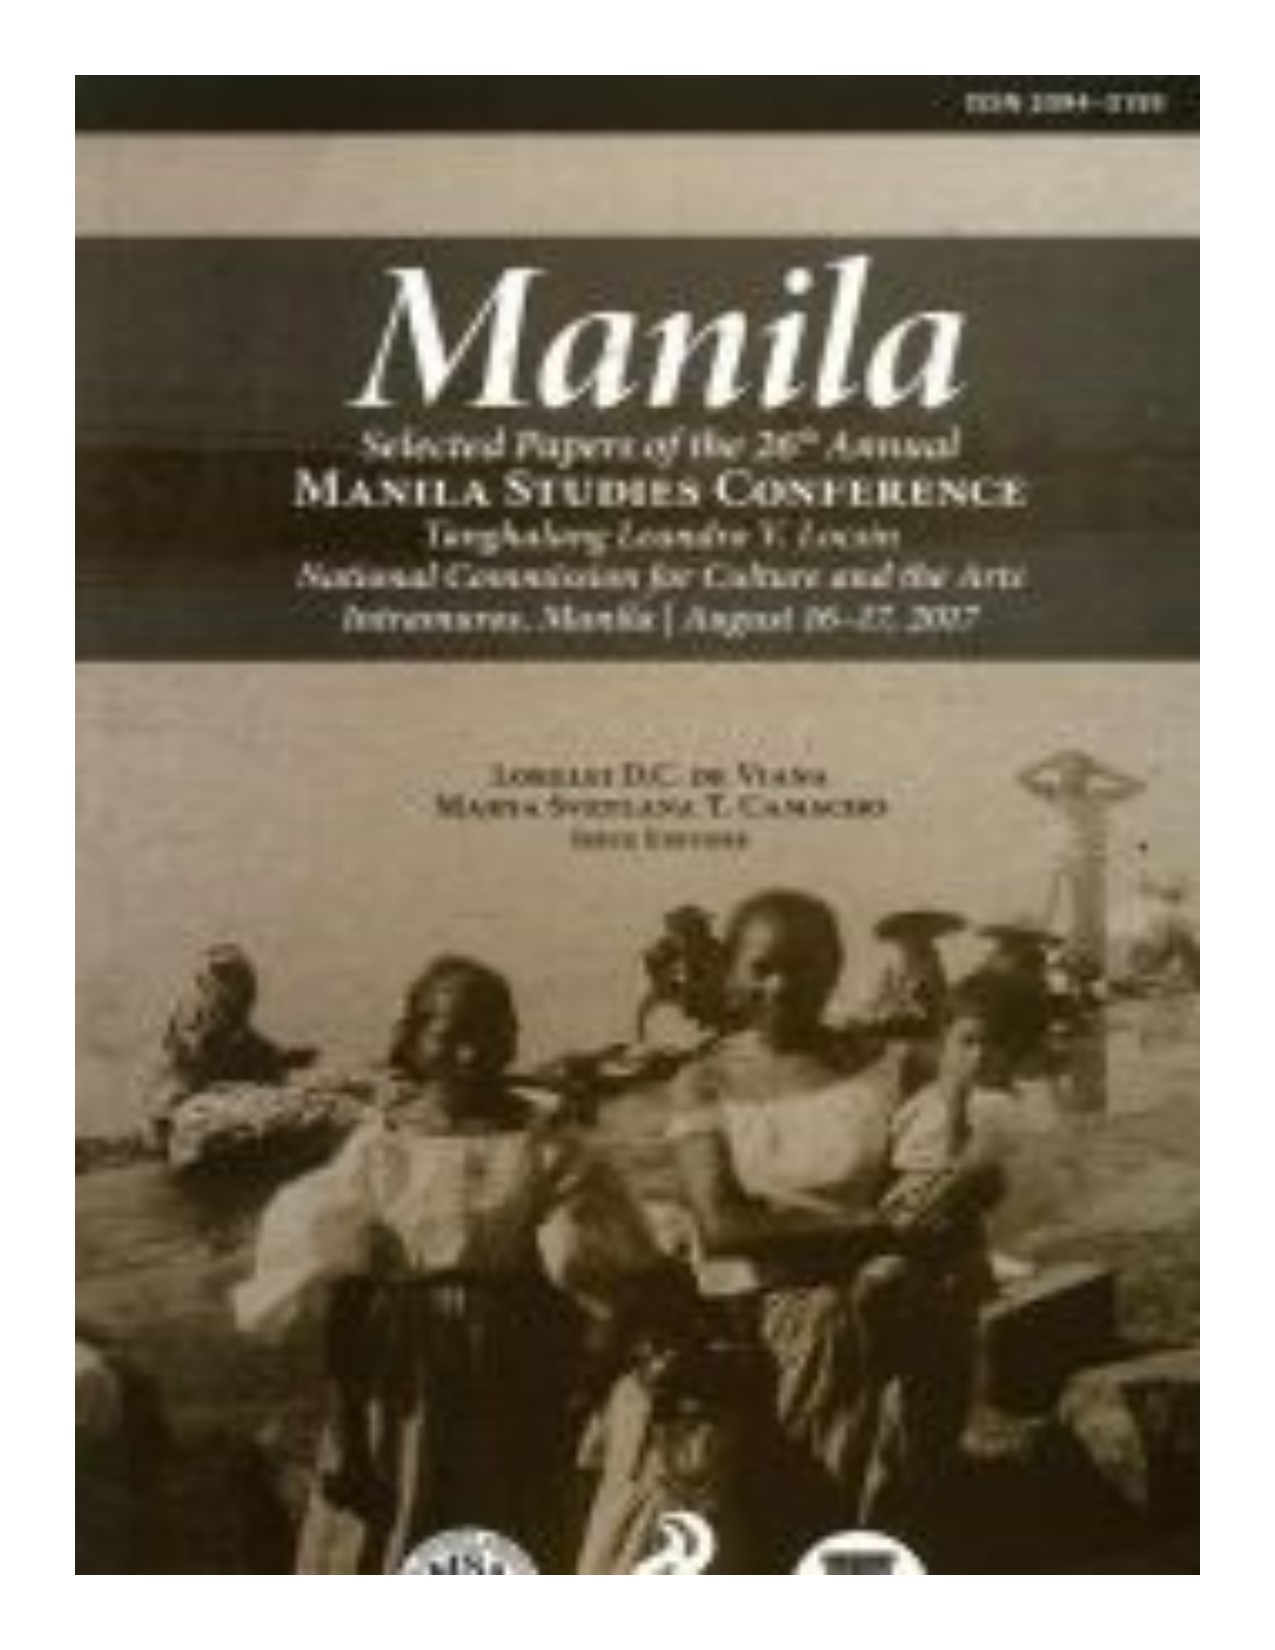 Manila selected papers of the 26th Annual Manila Studies Conference